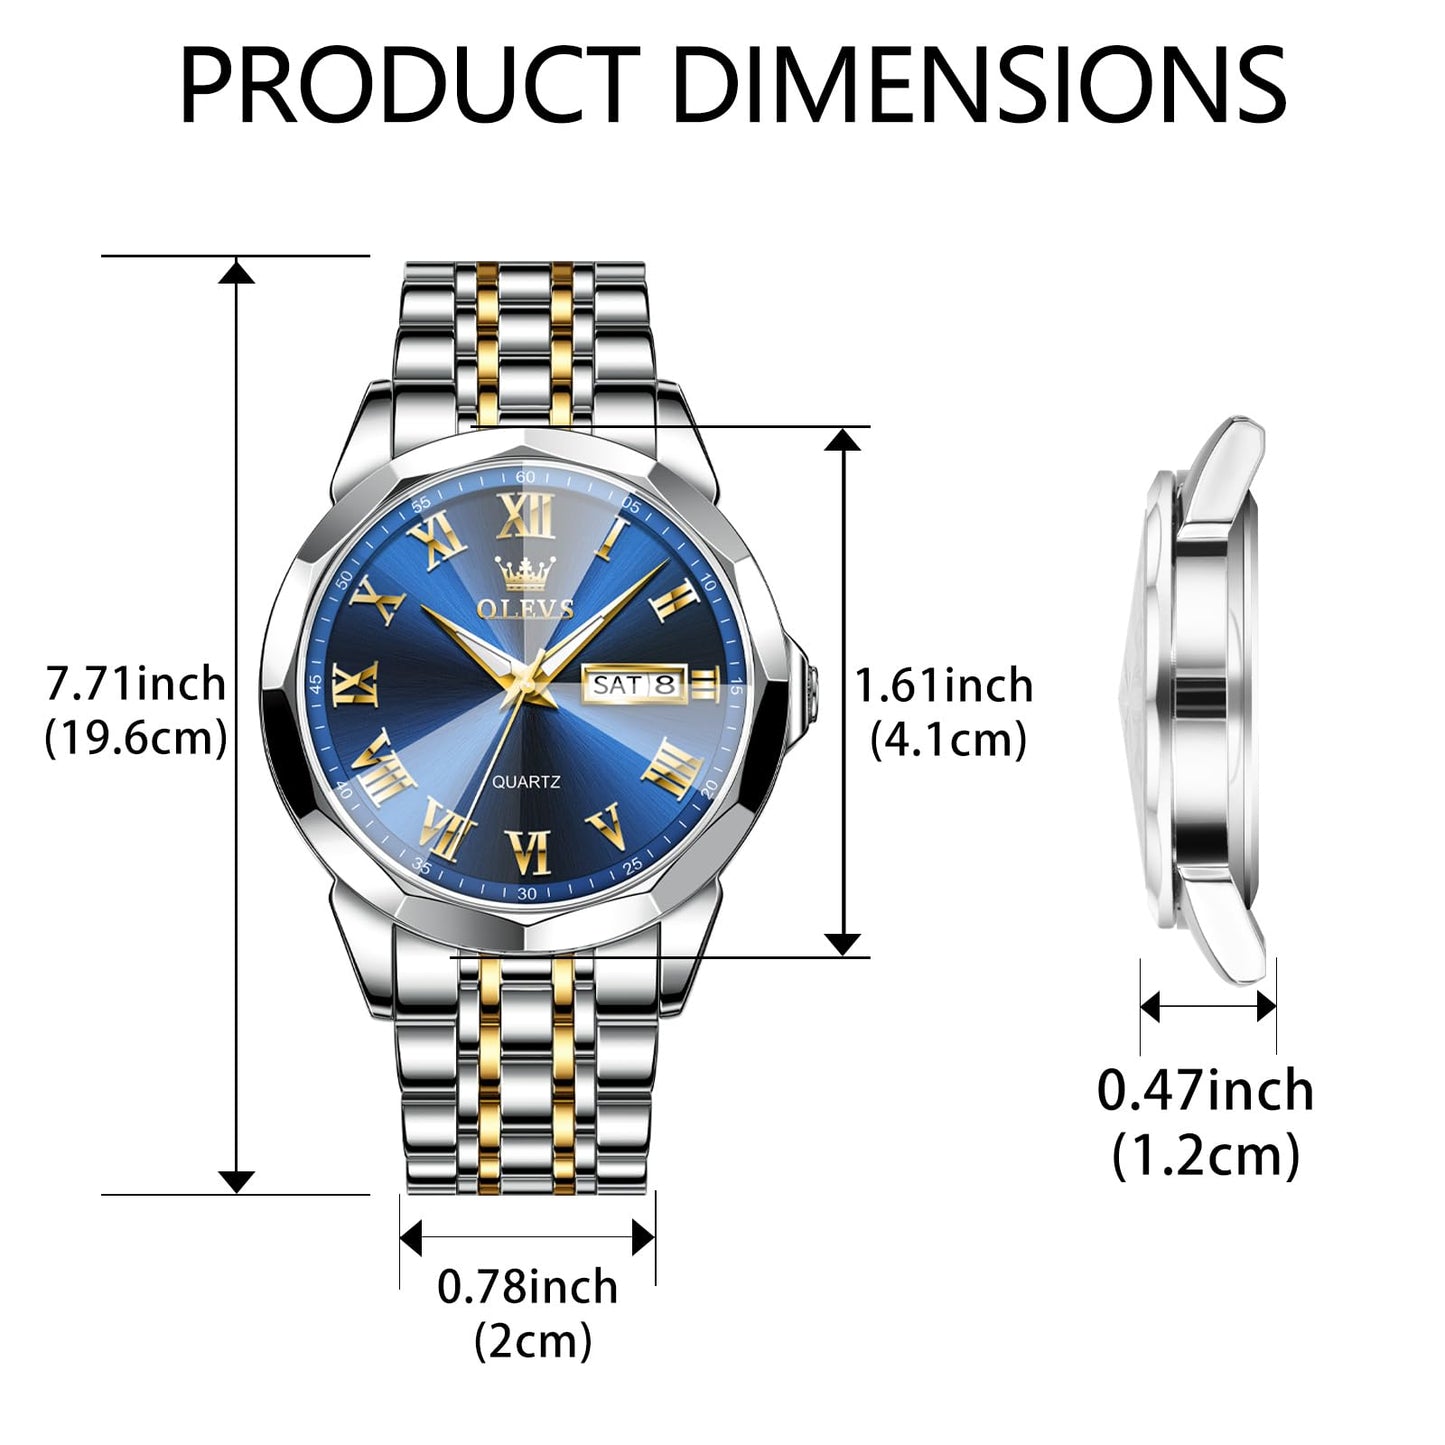 OLEVS Watch Men Blue Face Men's Watch with Day Date Big Face Gold and Silver Stainless Steel Men Watch Business Dress Watches for Men Classic Analog Men's Wrist Watches Reloj de Hombre Roman Numerals